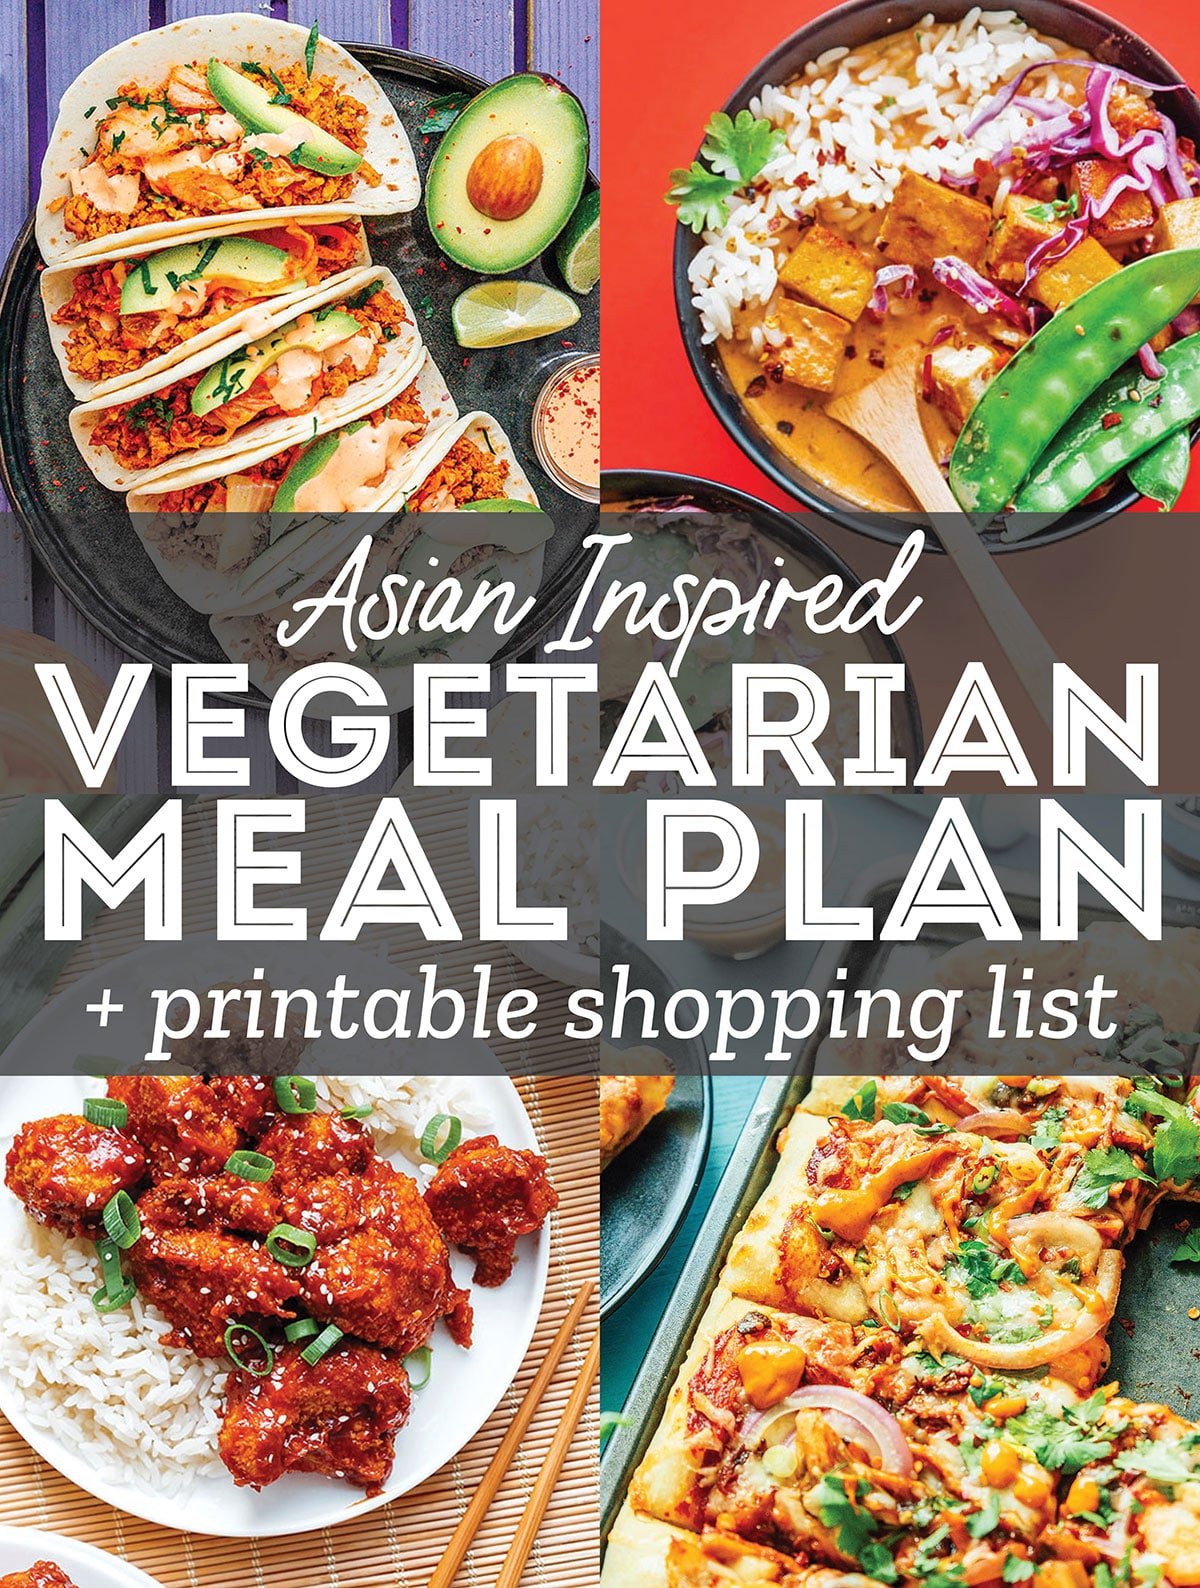 Collage of photos with the text "vegetarian meal plan"